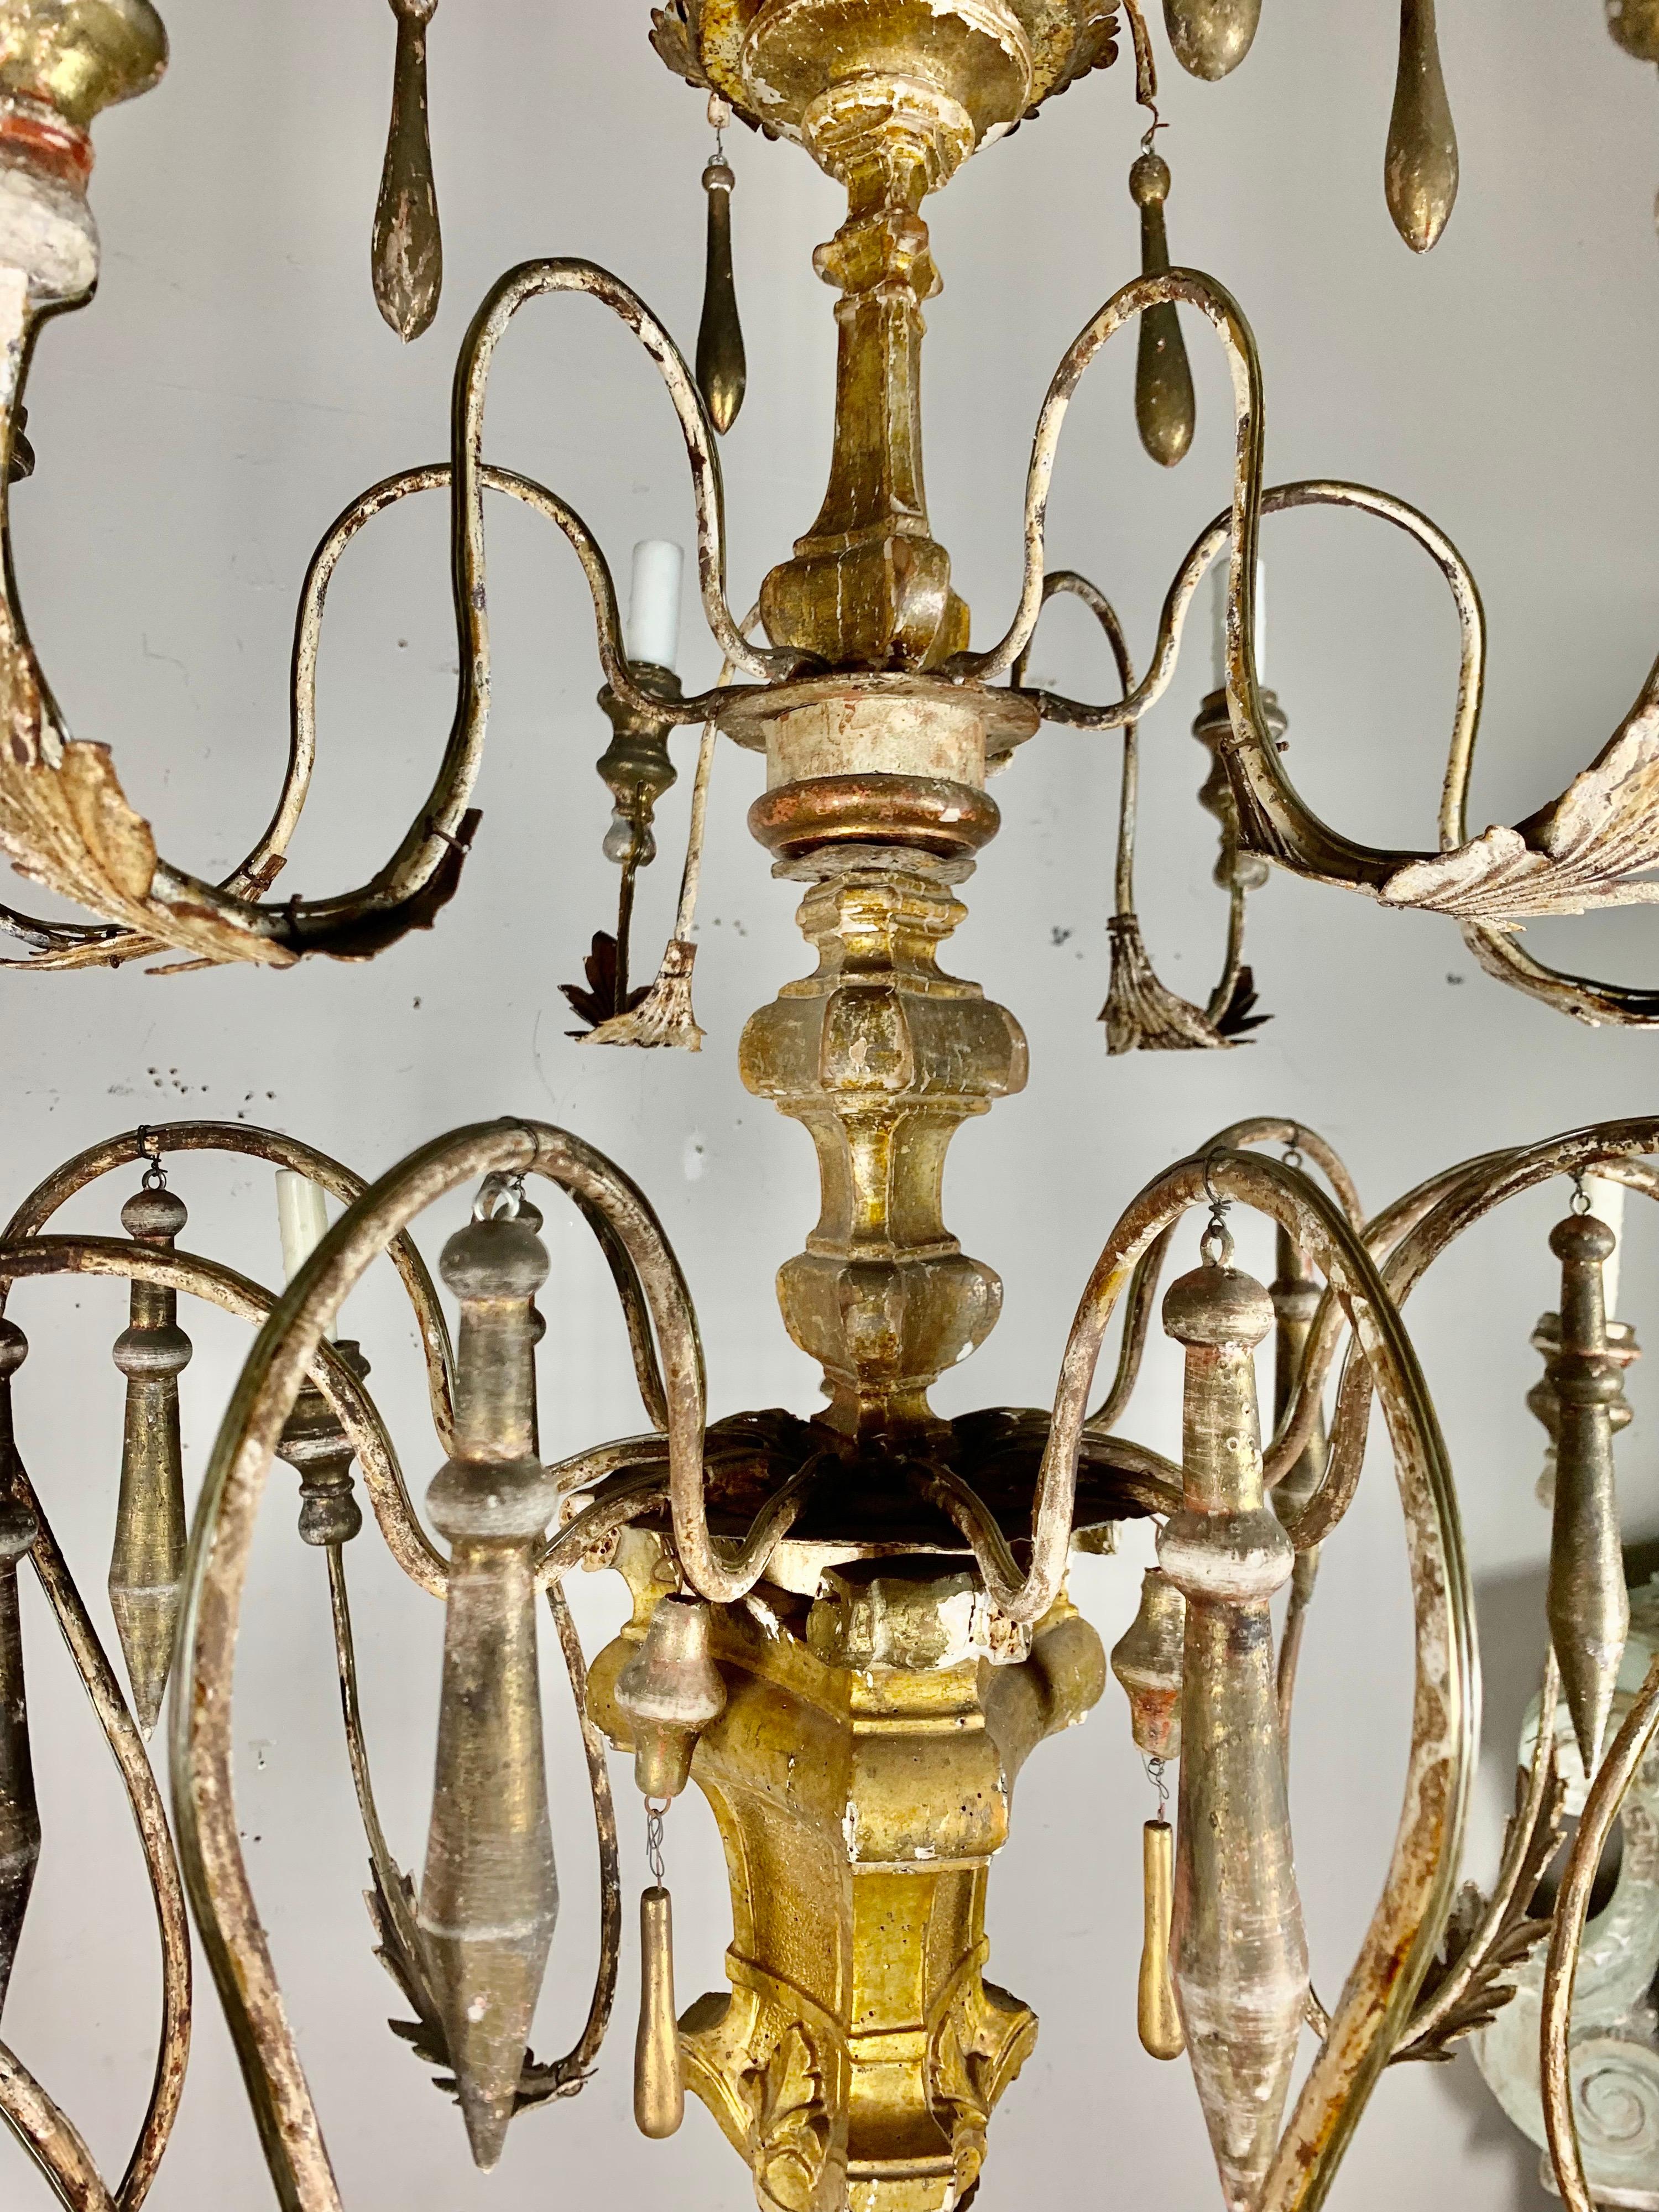 Italian giltwood & metal eight light chandeliers with giltwood drops throughout. The chandelier has a beautiful patina throughout. The chandelier is newly wired with drip wax candle covers. Includes chain & canopy.